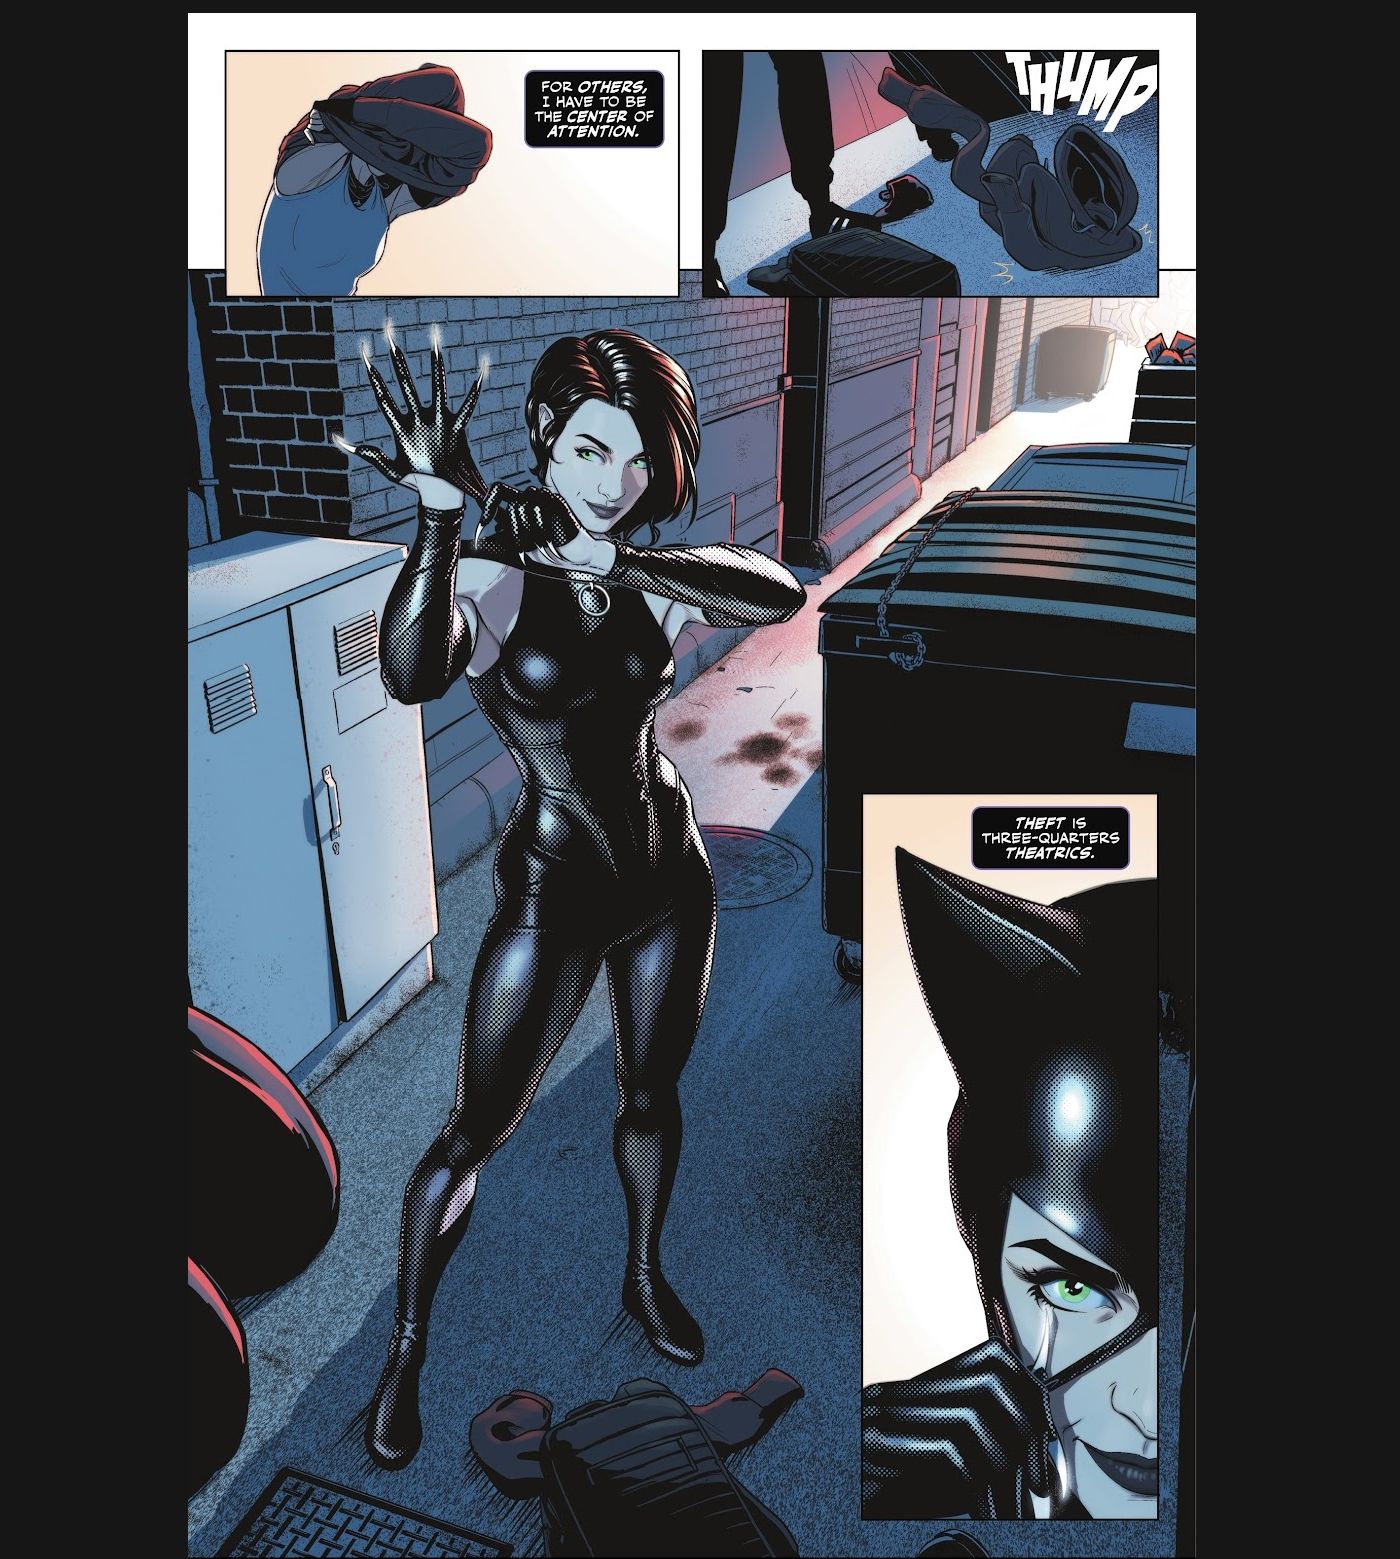 Catwoman, suiting up for a heist.